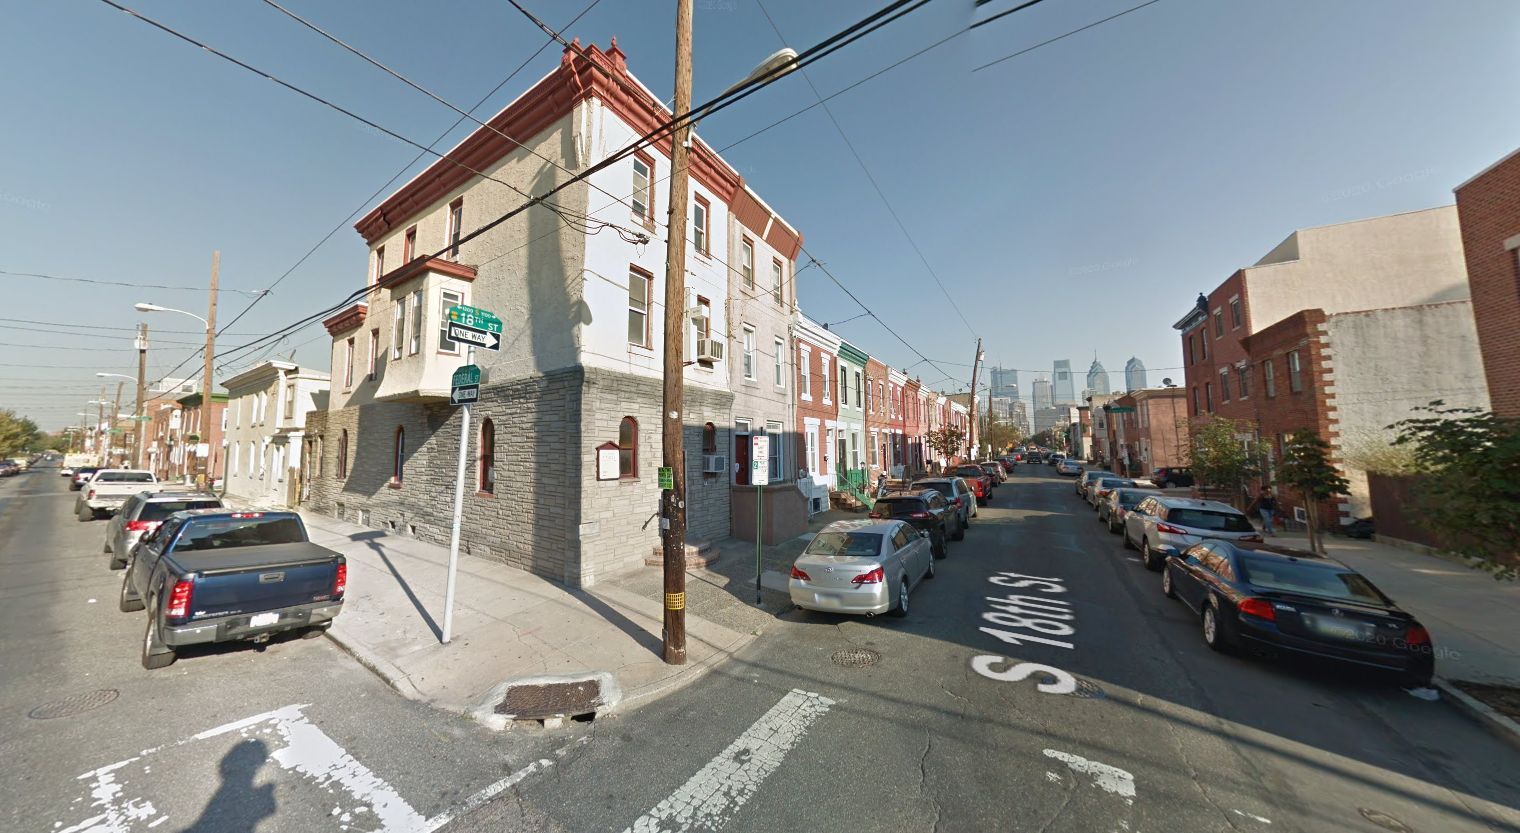 1164 South 18th Street prior to demolition. Looking northwest. September 2017, Credit: Google Maps